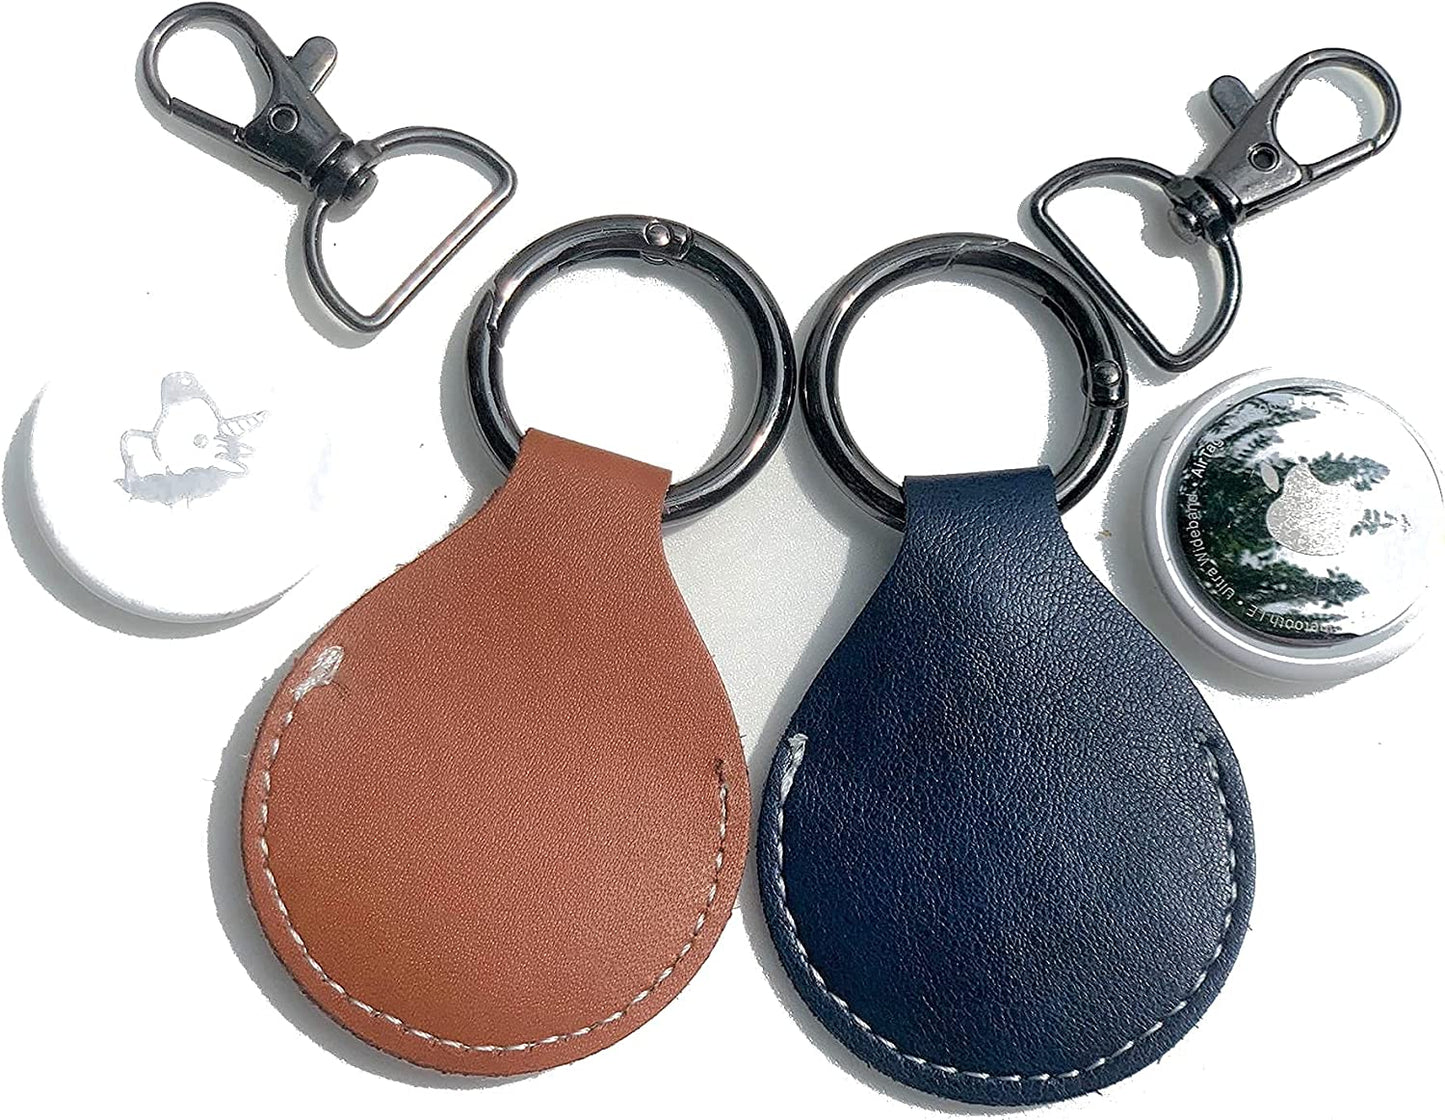 Airtag Holder Air Tag Holder Anti-Lost Items Apple Airtags Pet Collar Protection - NO More Lost VALUABLES - Genuine Leather 2 Pack (Multi Colors: Dark Blue & Saddle Brown) Trendsee (TS LG BE BR)